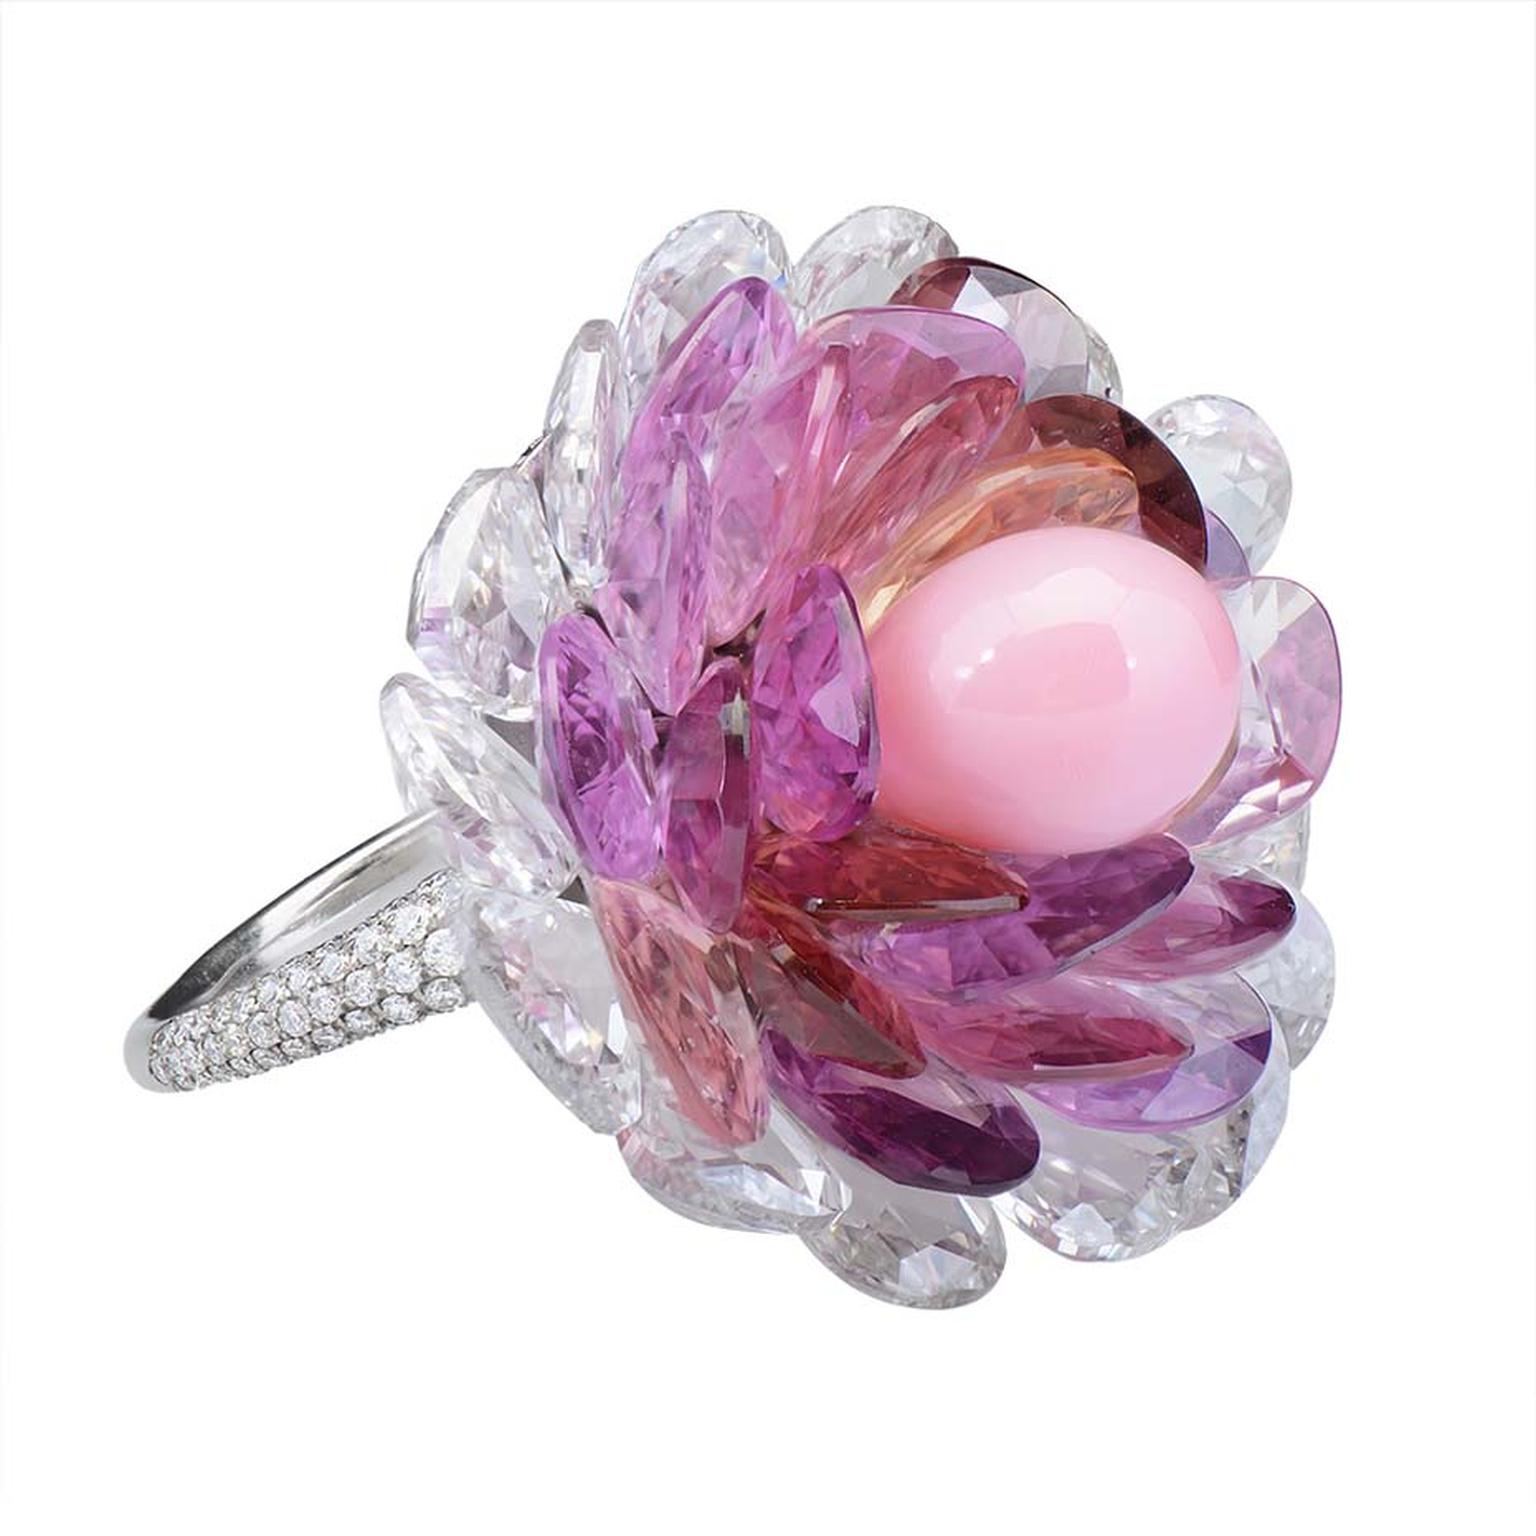 Morelle Davidson's one-of-a-kind platinum ring features a rare conch pearl surrounded by pink sapphire and rose-cut diamond petals.